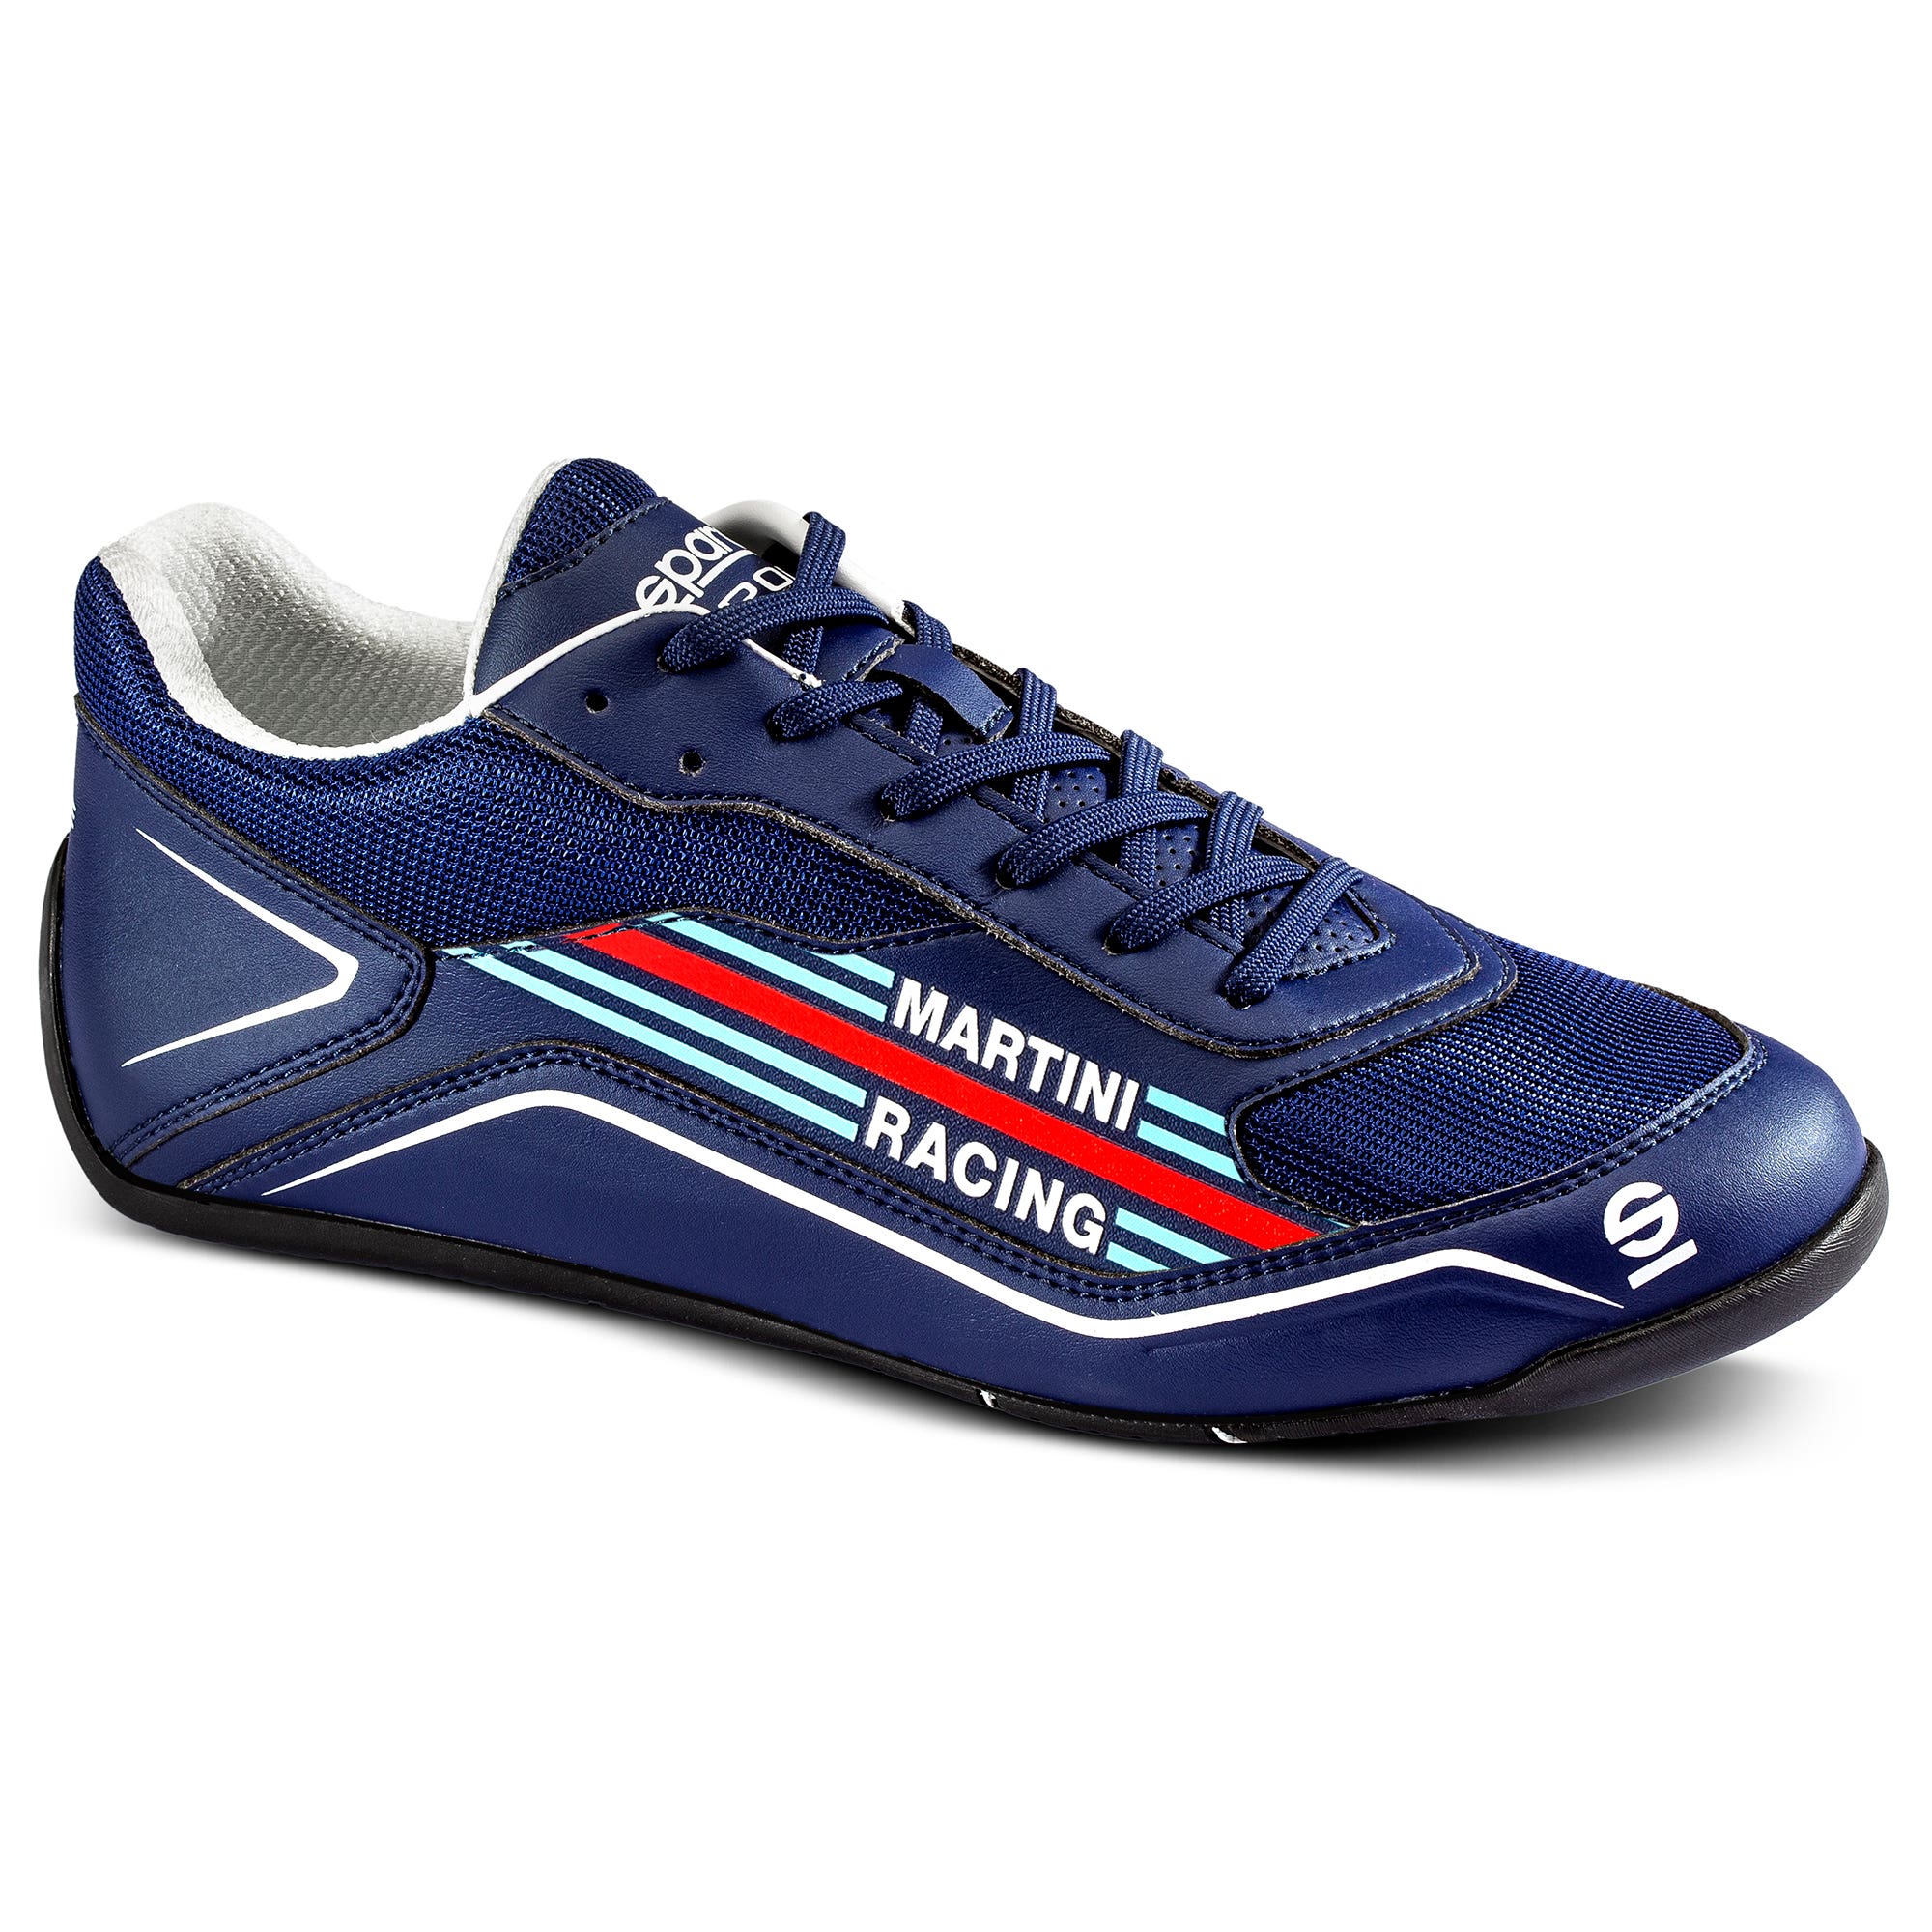 S-POLE SNEAEKERS MARTINI RACING - Sparco Shop